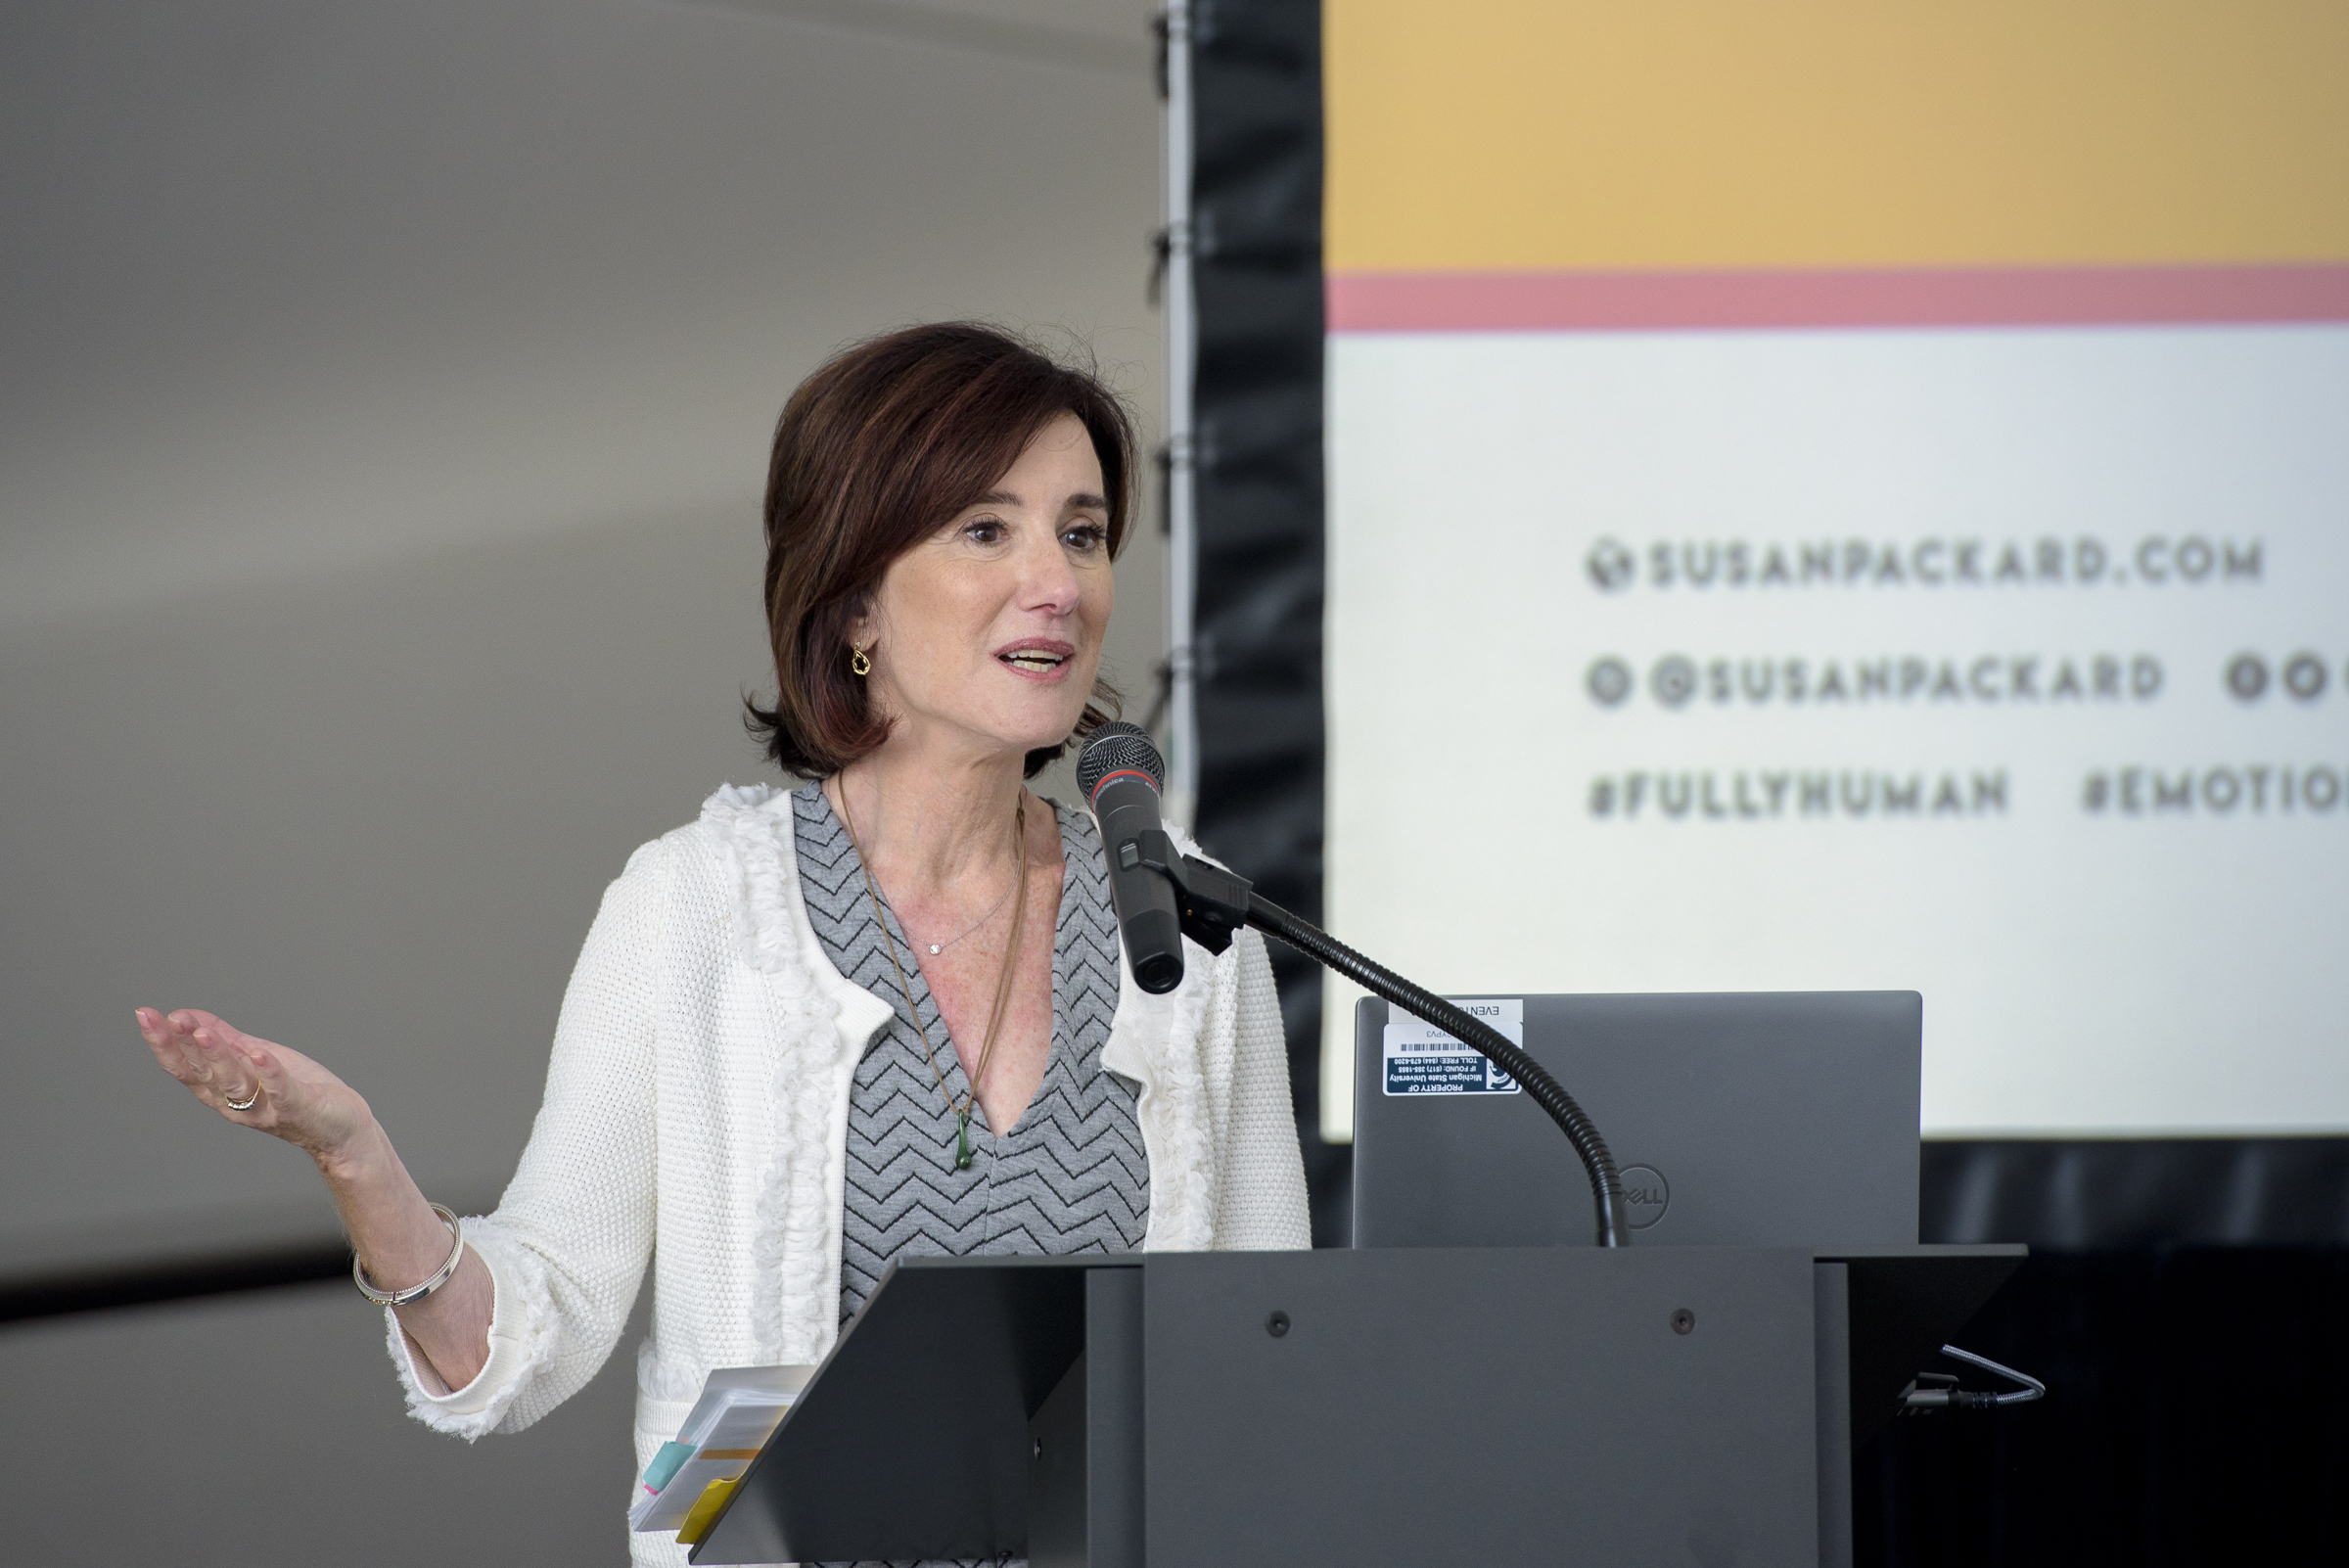 Fully Human: Lessons in Emotional Intelligence with Susan Packard